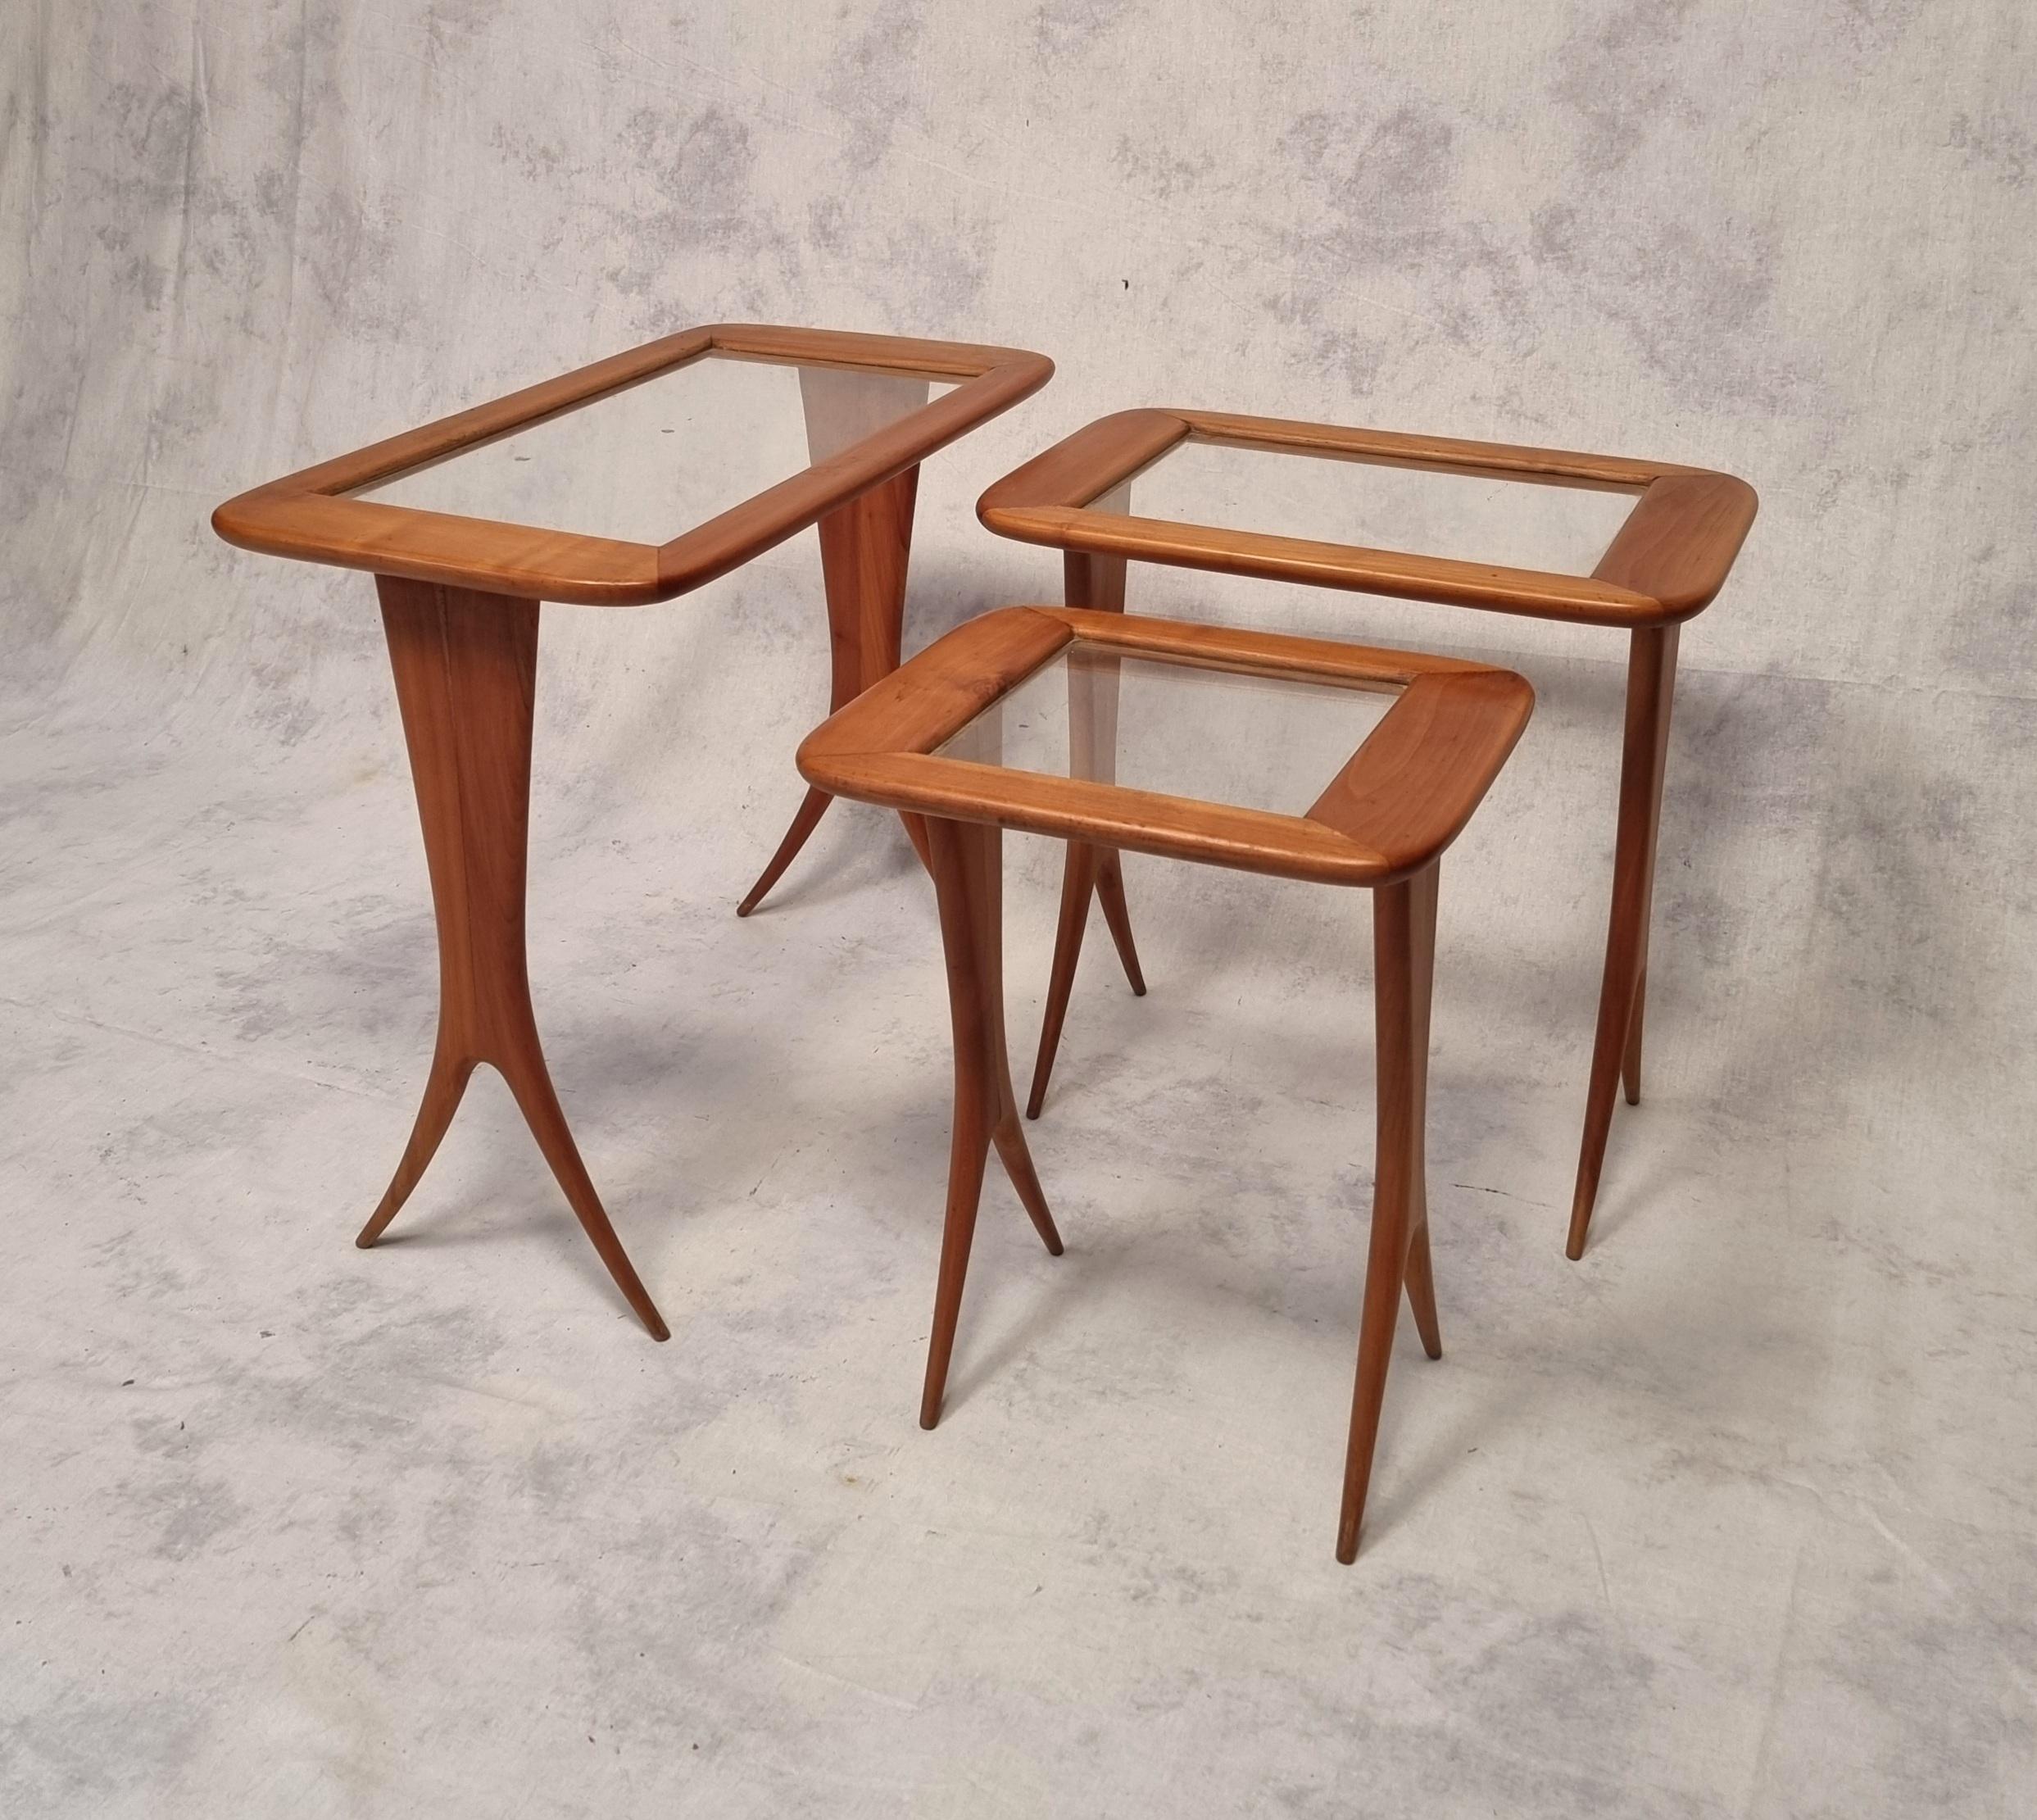 French Suite of Nesting Tables by Raphaël Raffel, Cherrywood, Ca 1955